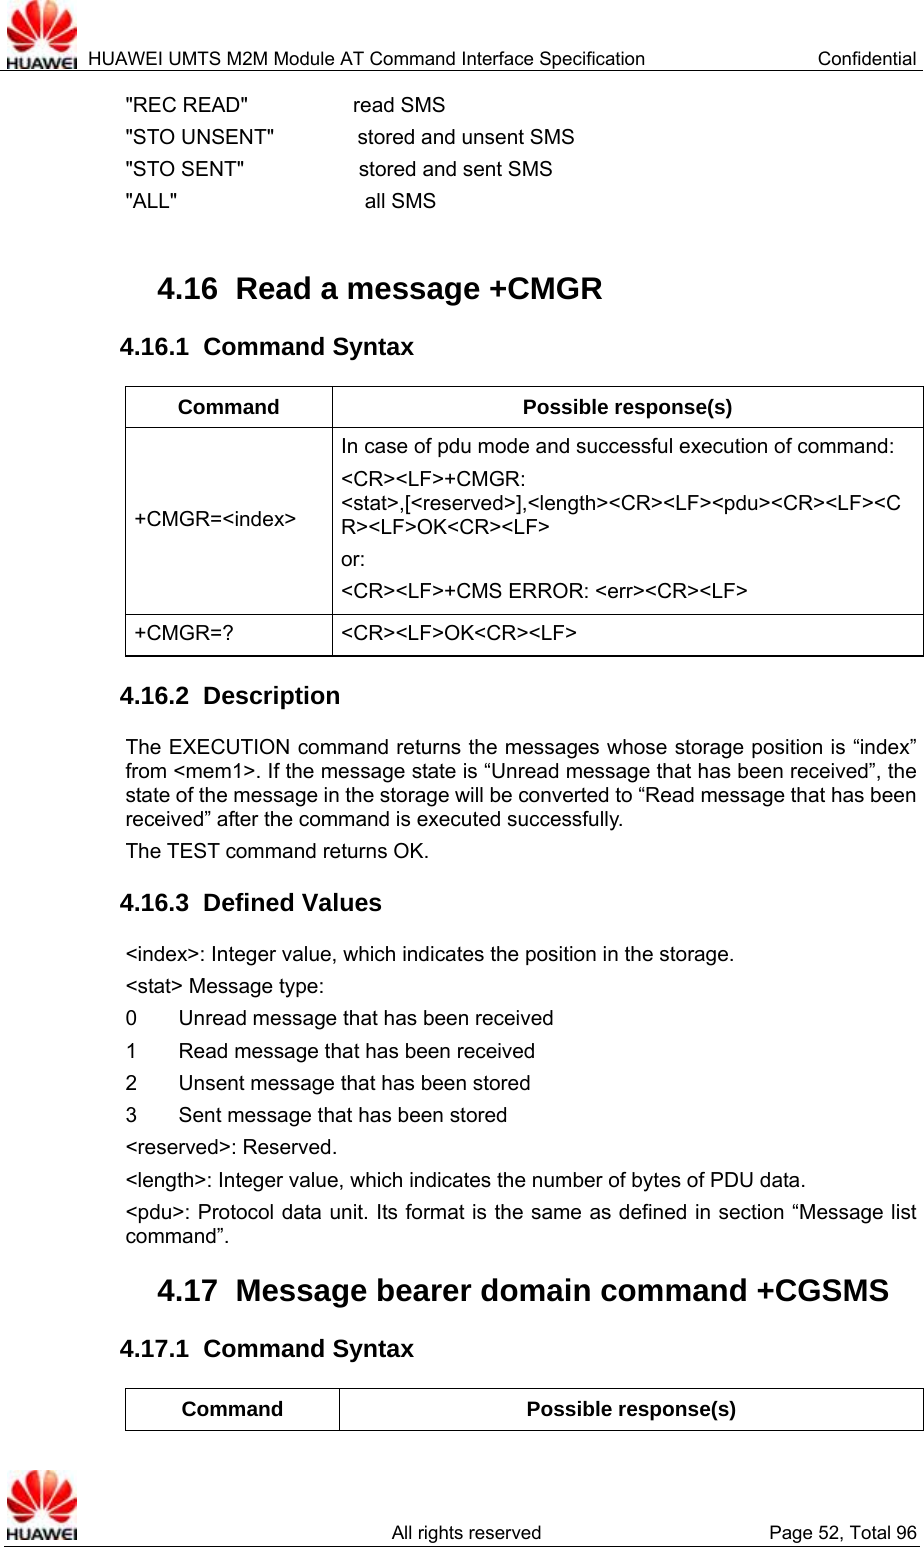  HUAWEI UMTS M2M Module AT Command Interface Specification  Confidential   All rights reserved  Page 52, Total 96 &quot;REC READ&quot;          read SMS &quot;STO UNSENT&quot;        stored and unsent SMS &quot;STO SENT&quot;           stored and sent SMS &quot;ALL&quot;                  all SMS  4.16  Read a message +CMGR 4.16.1  Command Syntax Command Possible response(s) +CMGR=&lt;index&gt; In case of pdu mode and successful execution of command: &lt;CR&gt;&lt;LF&gt;+CMGR: &lt;stat&gt;,[&lt;reserved&gt;],&lt;length&gt;&lt;CR&gt;&lt;LF&gt;&lt;pdu&gt;&lt;CR&gt;&lt;LF&gt;&lt;CR&gt;&lt;LF&gt;OK&lt;CR&gt;&lt;LF&gt; or:  &lt;CR&gt;&lt;LF&gt;+CMS ERROR: &lt;err&gt;&lt;CR&gt;&lt;LF&gt; +CMGR=? &lt;CR&gt;&lt;LF&gt;OK&lt;CR&gt;&lt;LF&gt; 4.16.2  Description The EXECUTION command returns the messages whose storage position is “index” from &lt;mem1&gt;. If the message state is “Unread message that has been received”, the state of the message in the storage will be converted to “Read message that has been received” after the command is executed successfully. The TEST command returns OK.   4.16.3  Defined Values &lt;index&gt;: Integer value, which indicates the position in the storage. &lt;stat&gt; Message type:   0    Unread message that has been received 1        Read message that has been received 2    Unsent message that has been stored 3        Sent message that has been stored &lt;reserved&gt;: Reserved.   &lt;length&gt;: Integer value, which indicates the number of bytes of PDU data.   &lt;pdu&gt;: Protocol data unit. Its format is the same as defined in section “Message list command”.  4.17  Message bearer domain command +CGSMS 4.17.1  Command Syntax Command Possible response(s) 